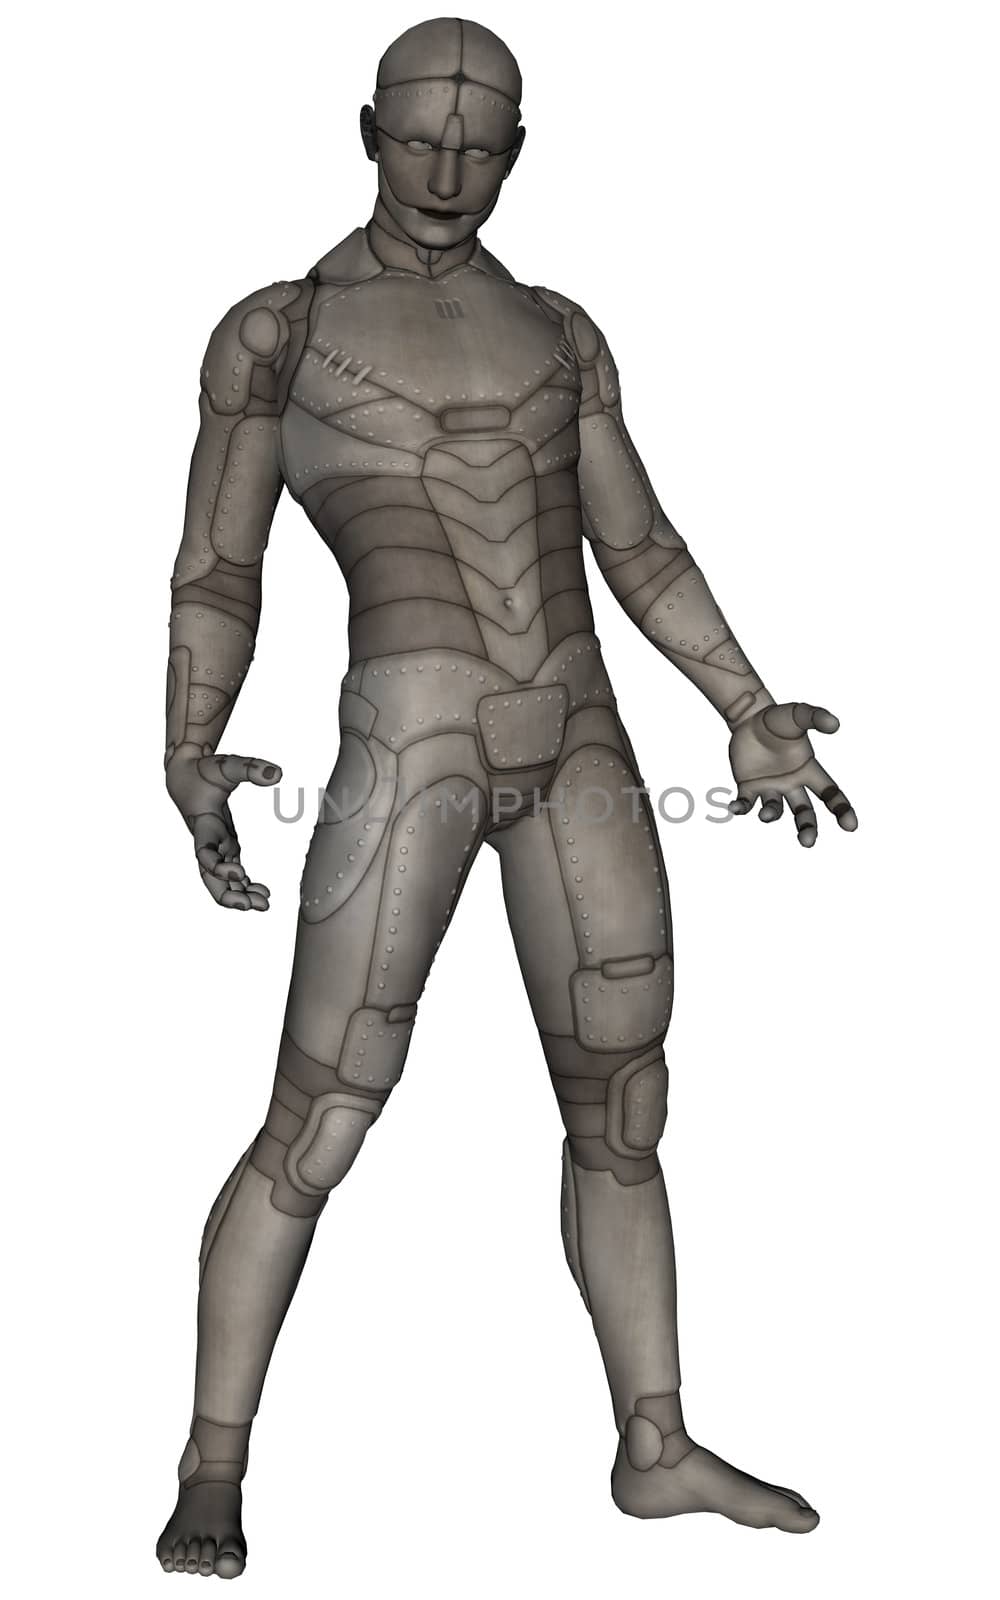 3D rendered scifi titanium man on white background isolated